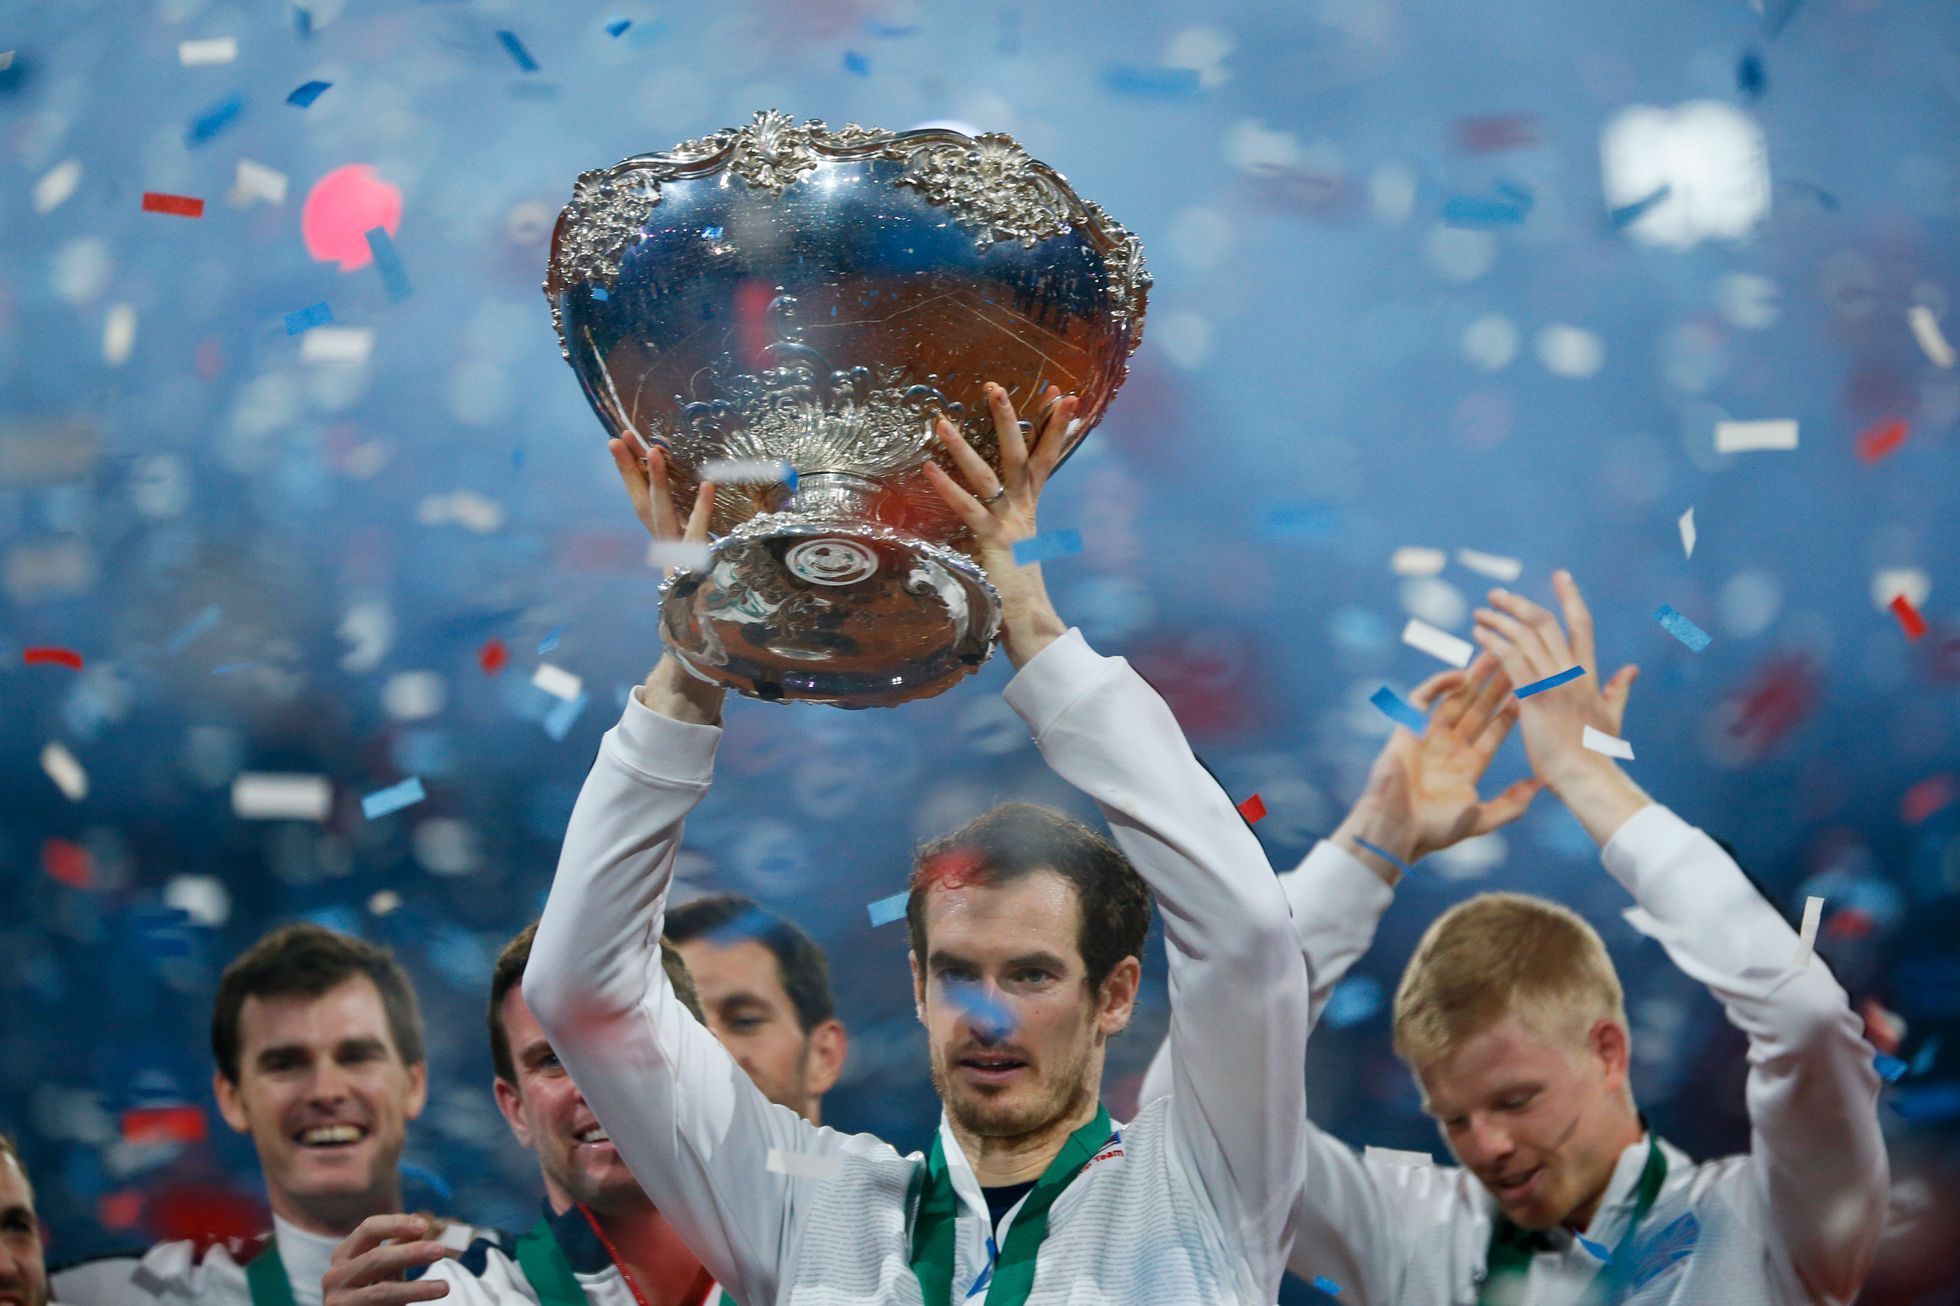 Men's Singles - Great Britain's Andy Murray celebrates with the trophy after winning the Davis Cup